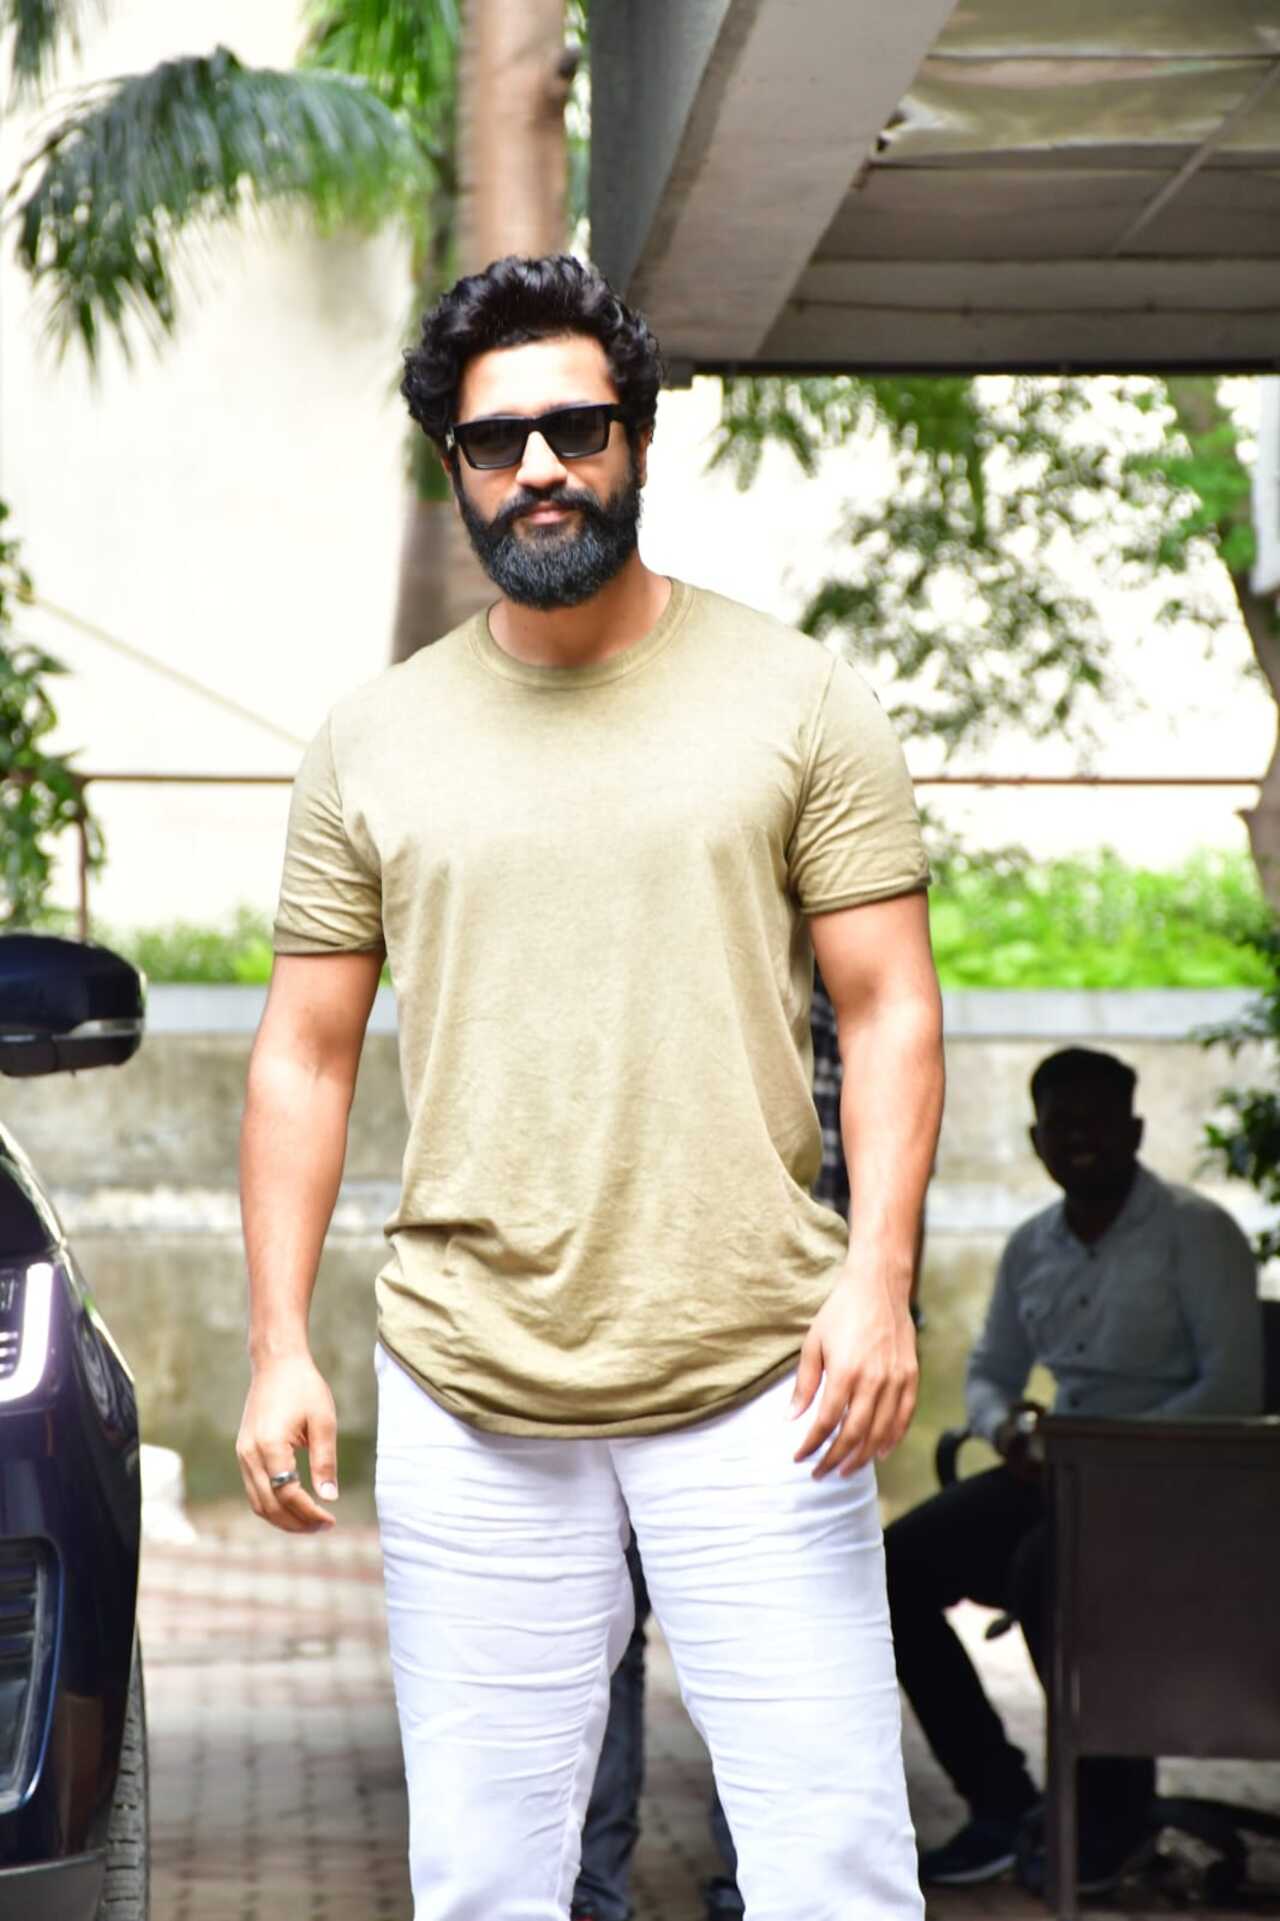 Vicky Kaushal stepped out in the city for work